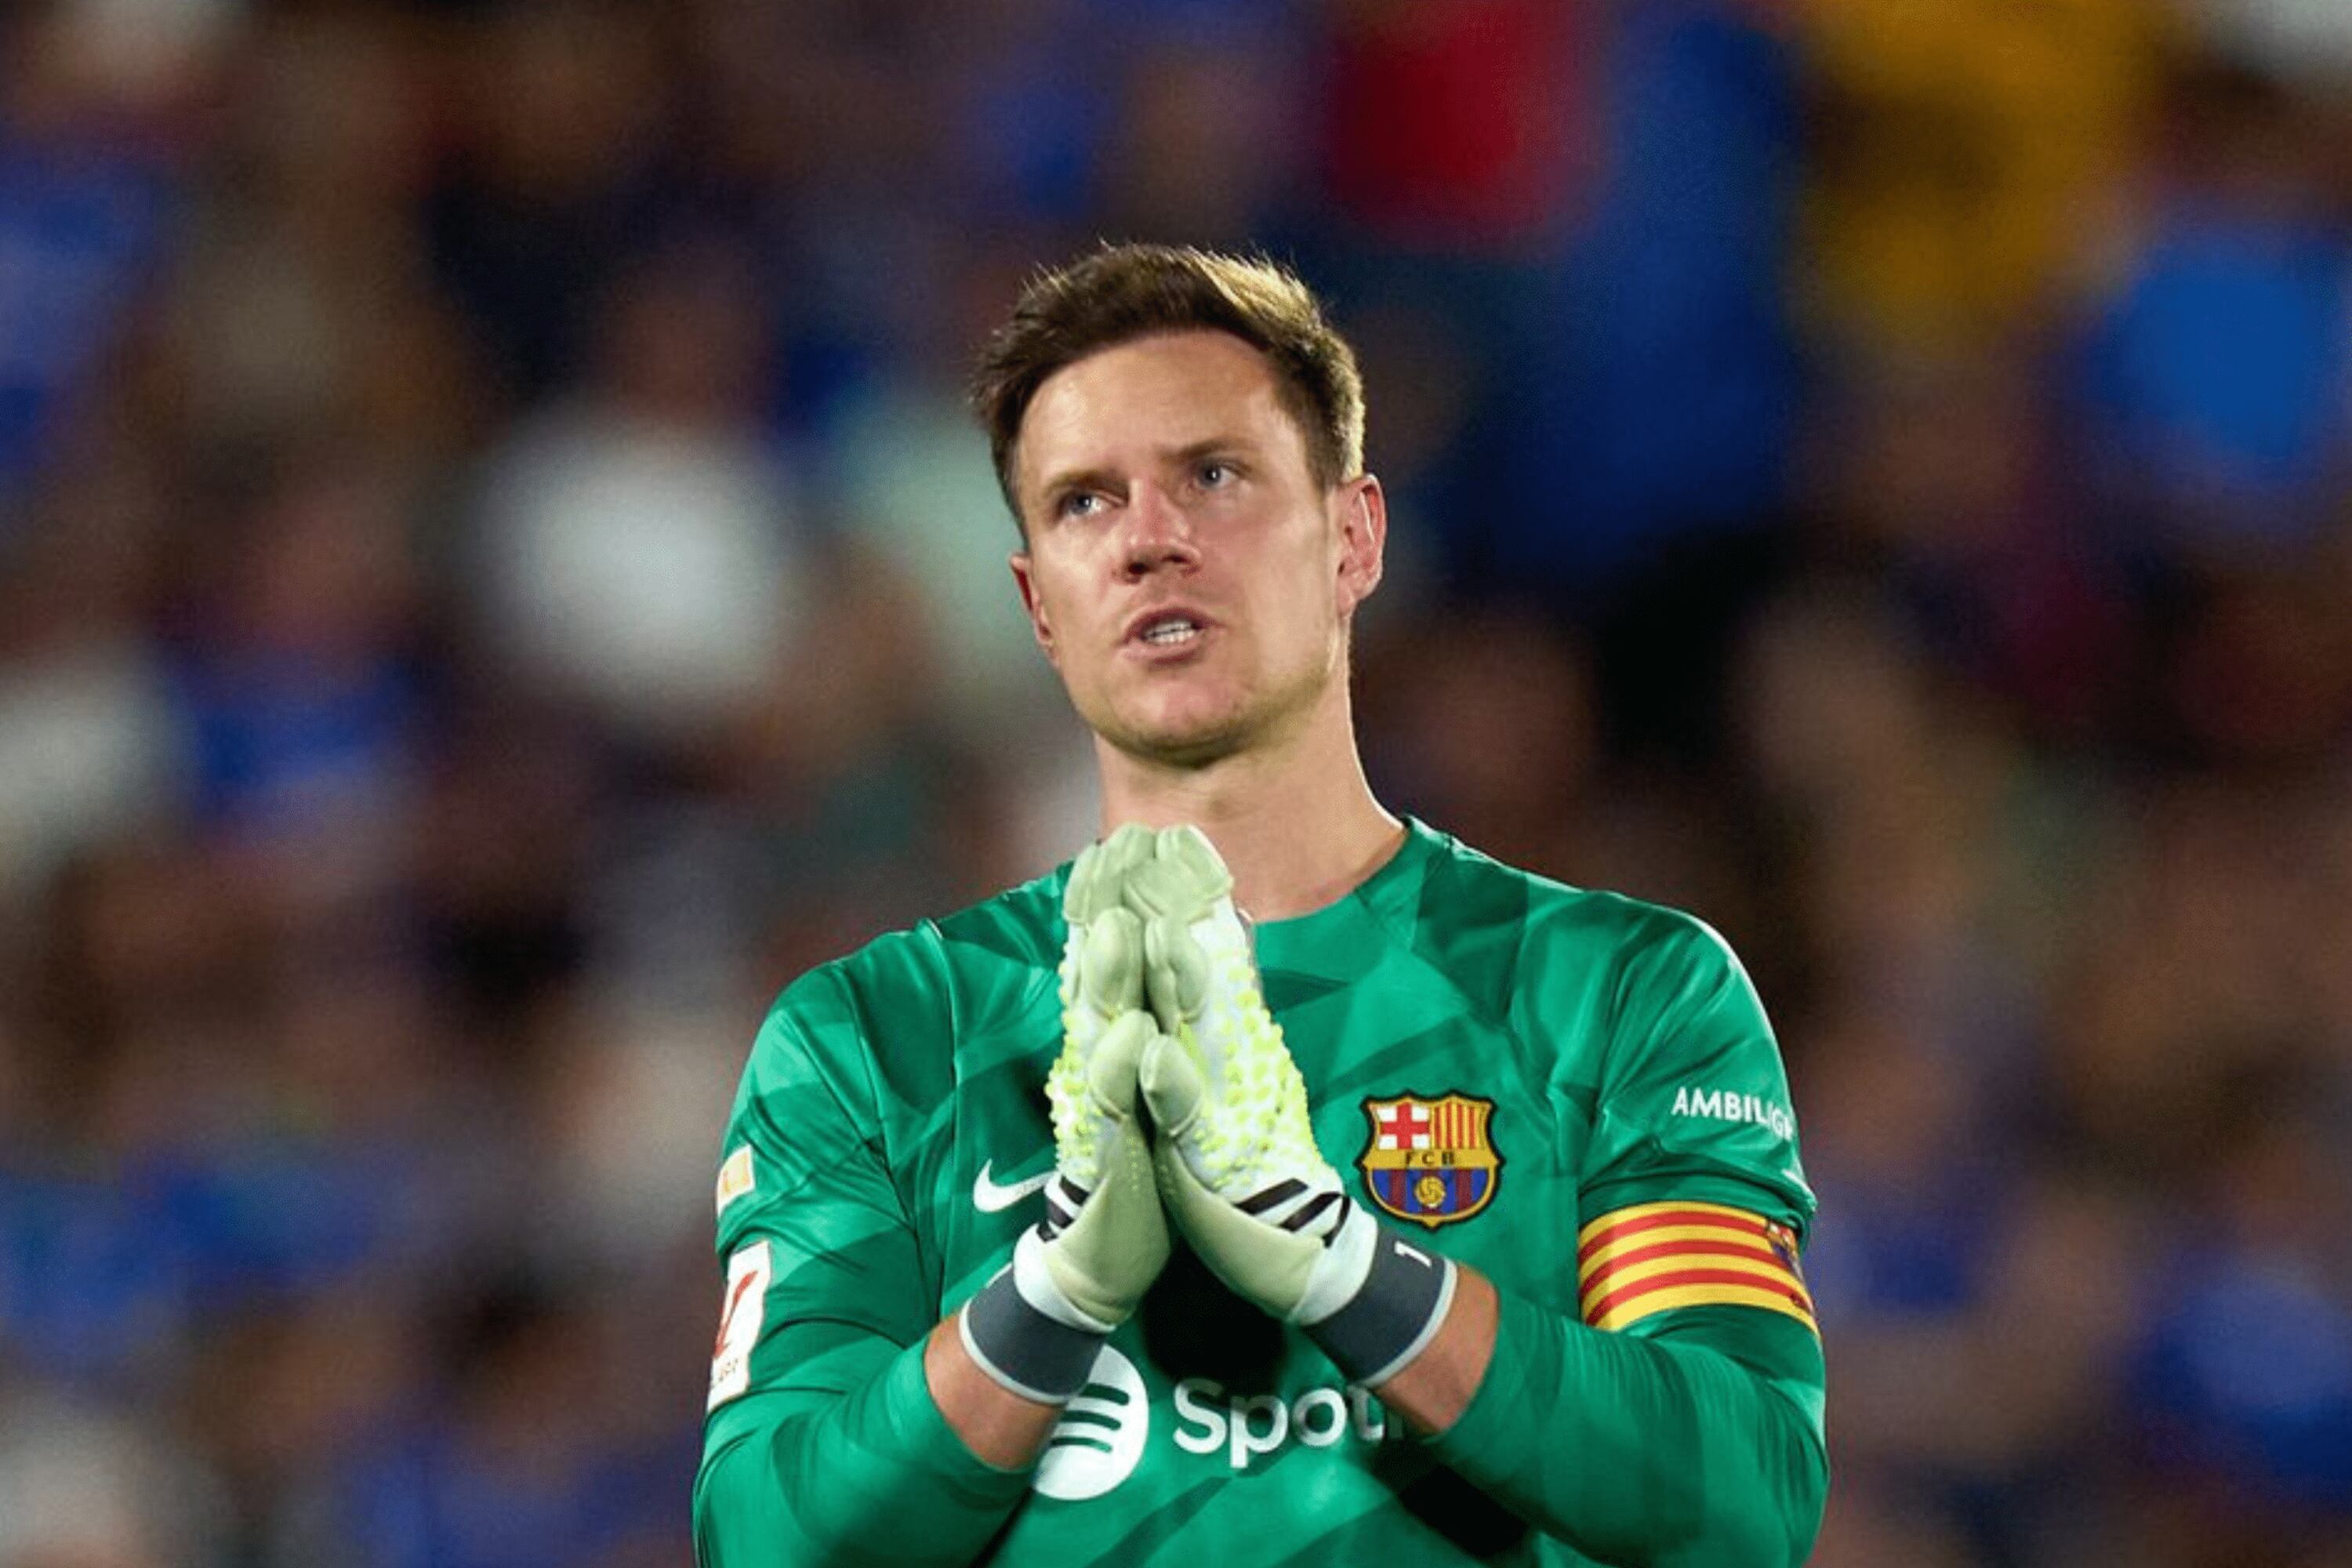 In the middle of the season, the terrible news that Ter Stegen gives to Xavi